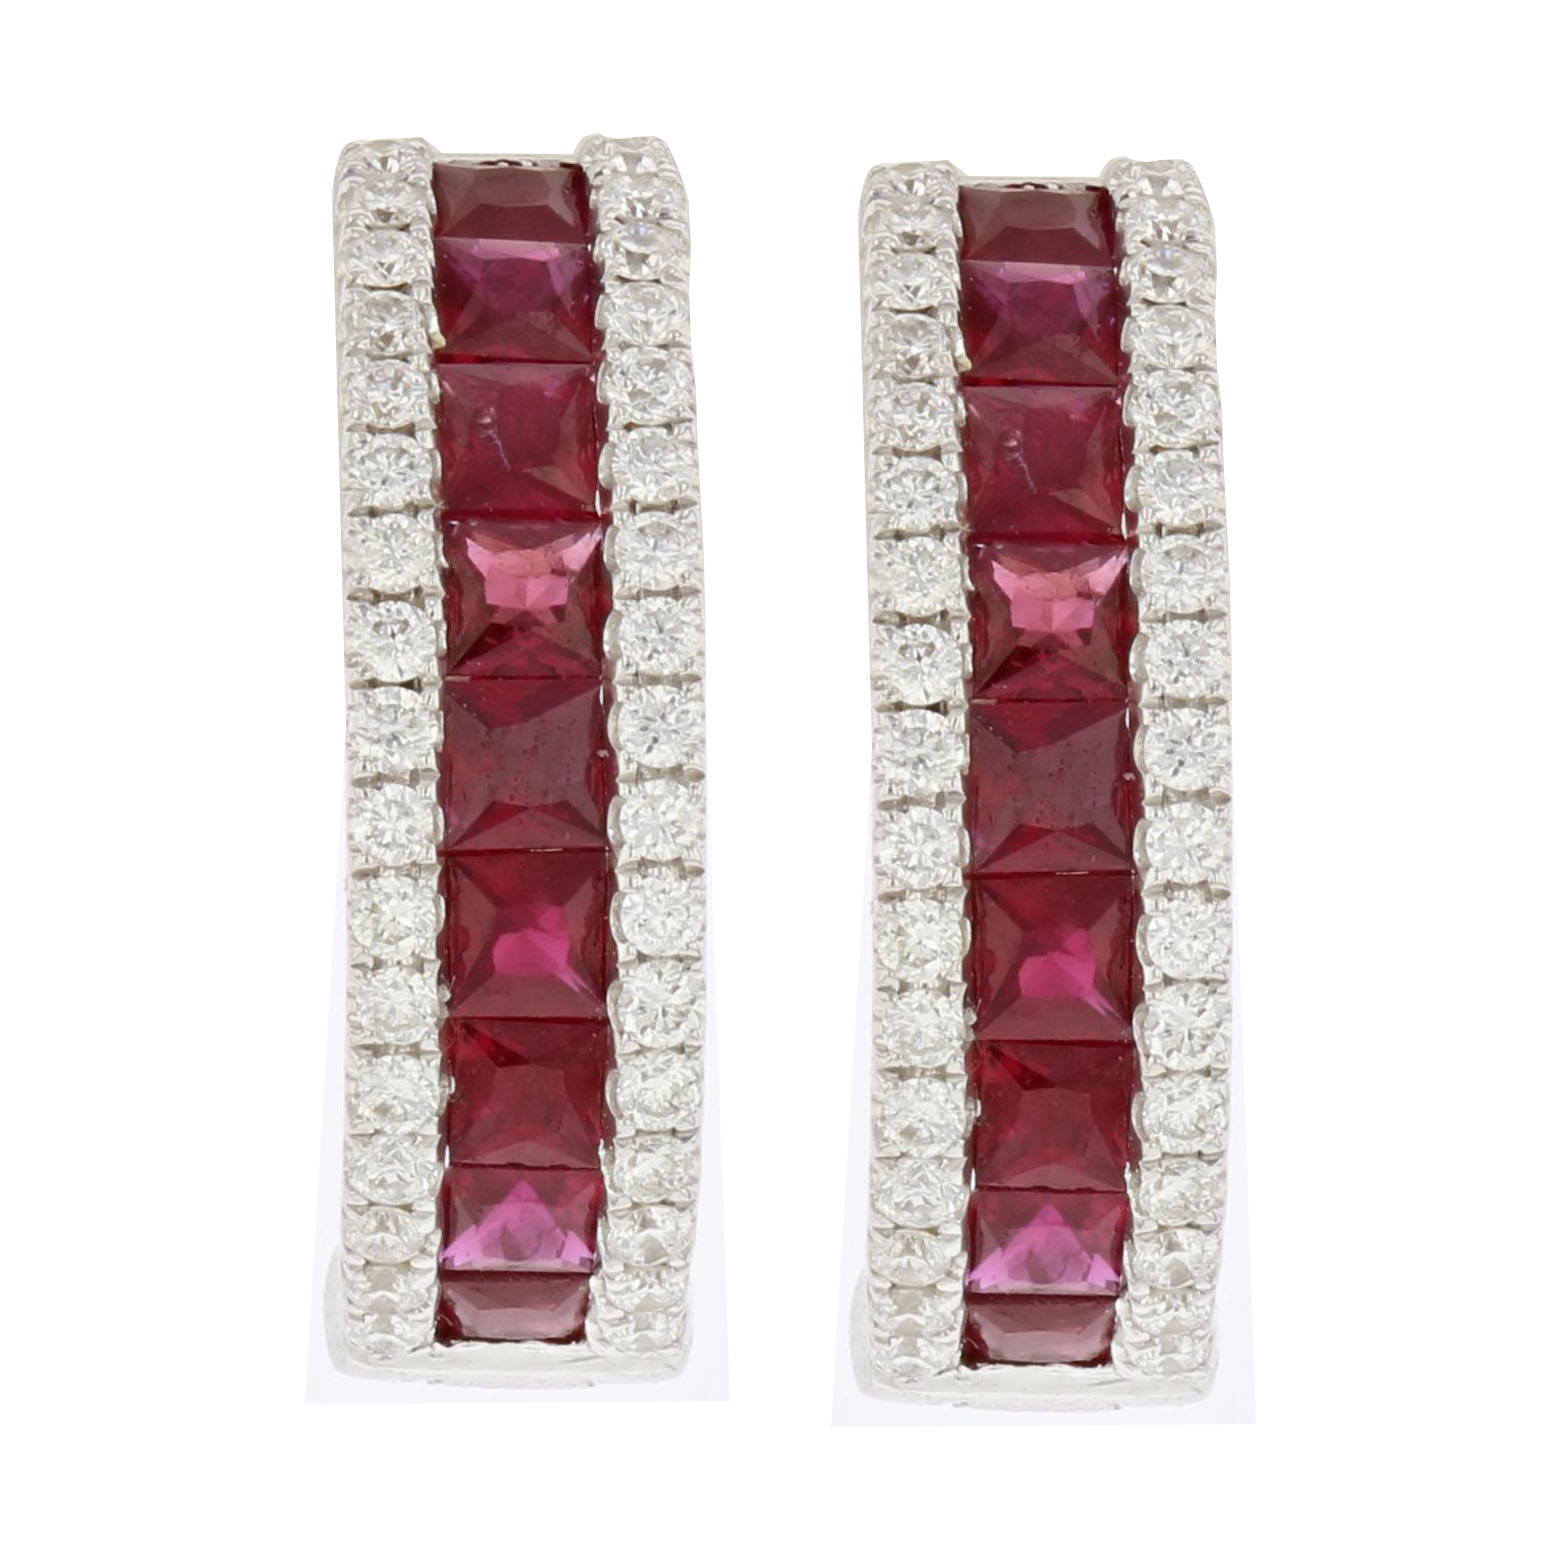 View 1.02ctw Diamond and Ruby Hoop Earrings in 18k White Gold